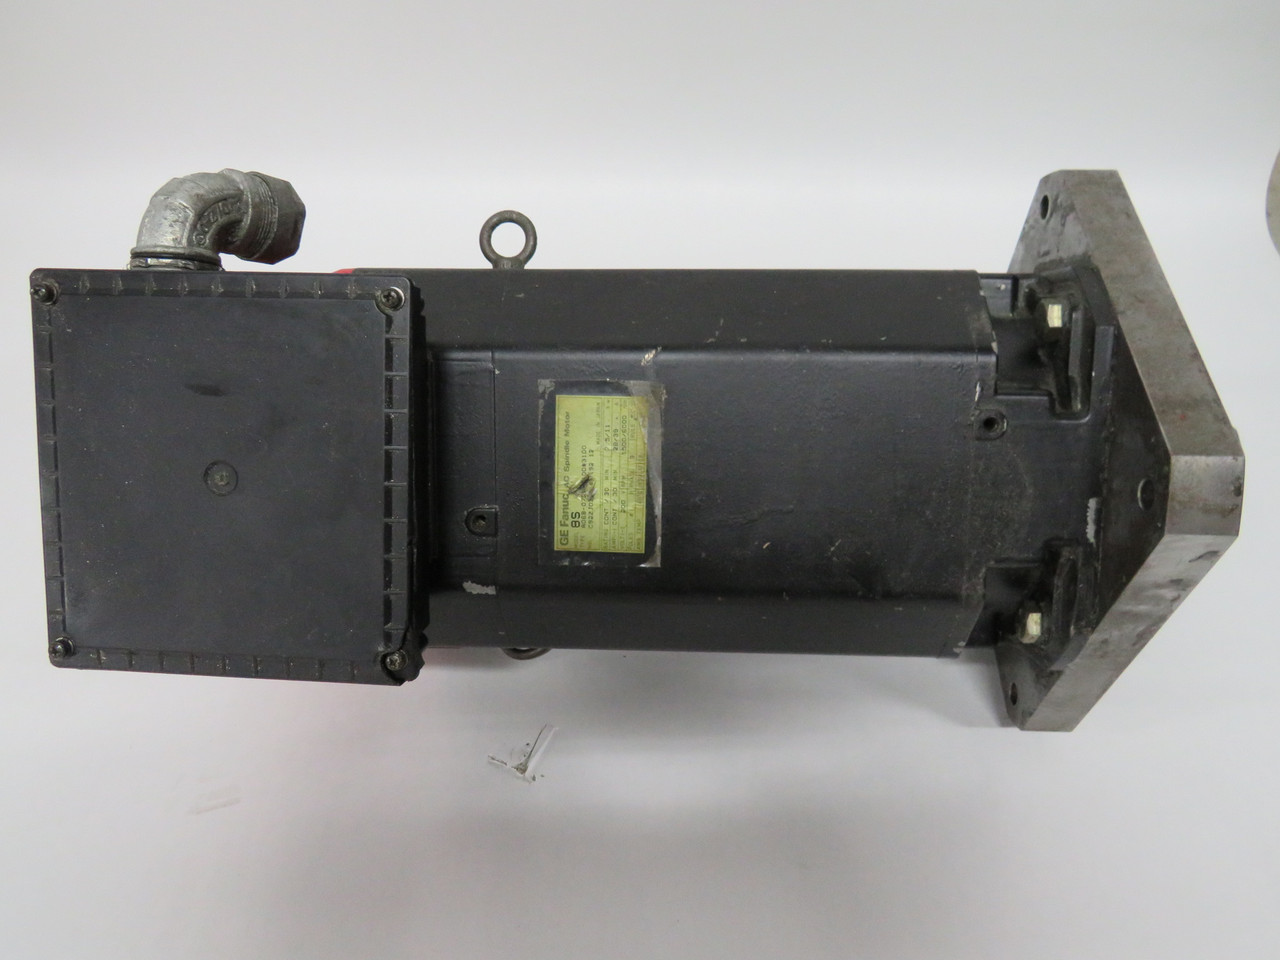 GE Fanuc A06B-0765-B100#3100 AC Spindle Motor 7.5/11kW 1500/6000RPM 200V USED